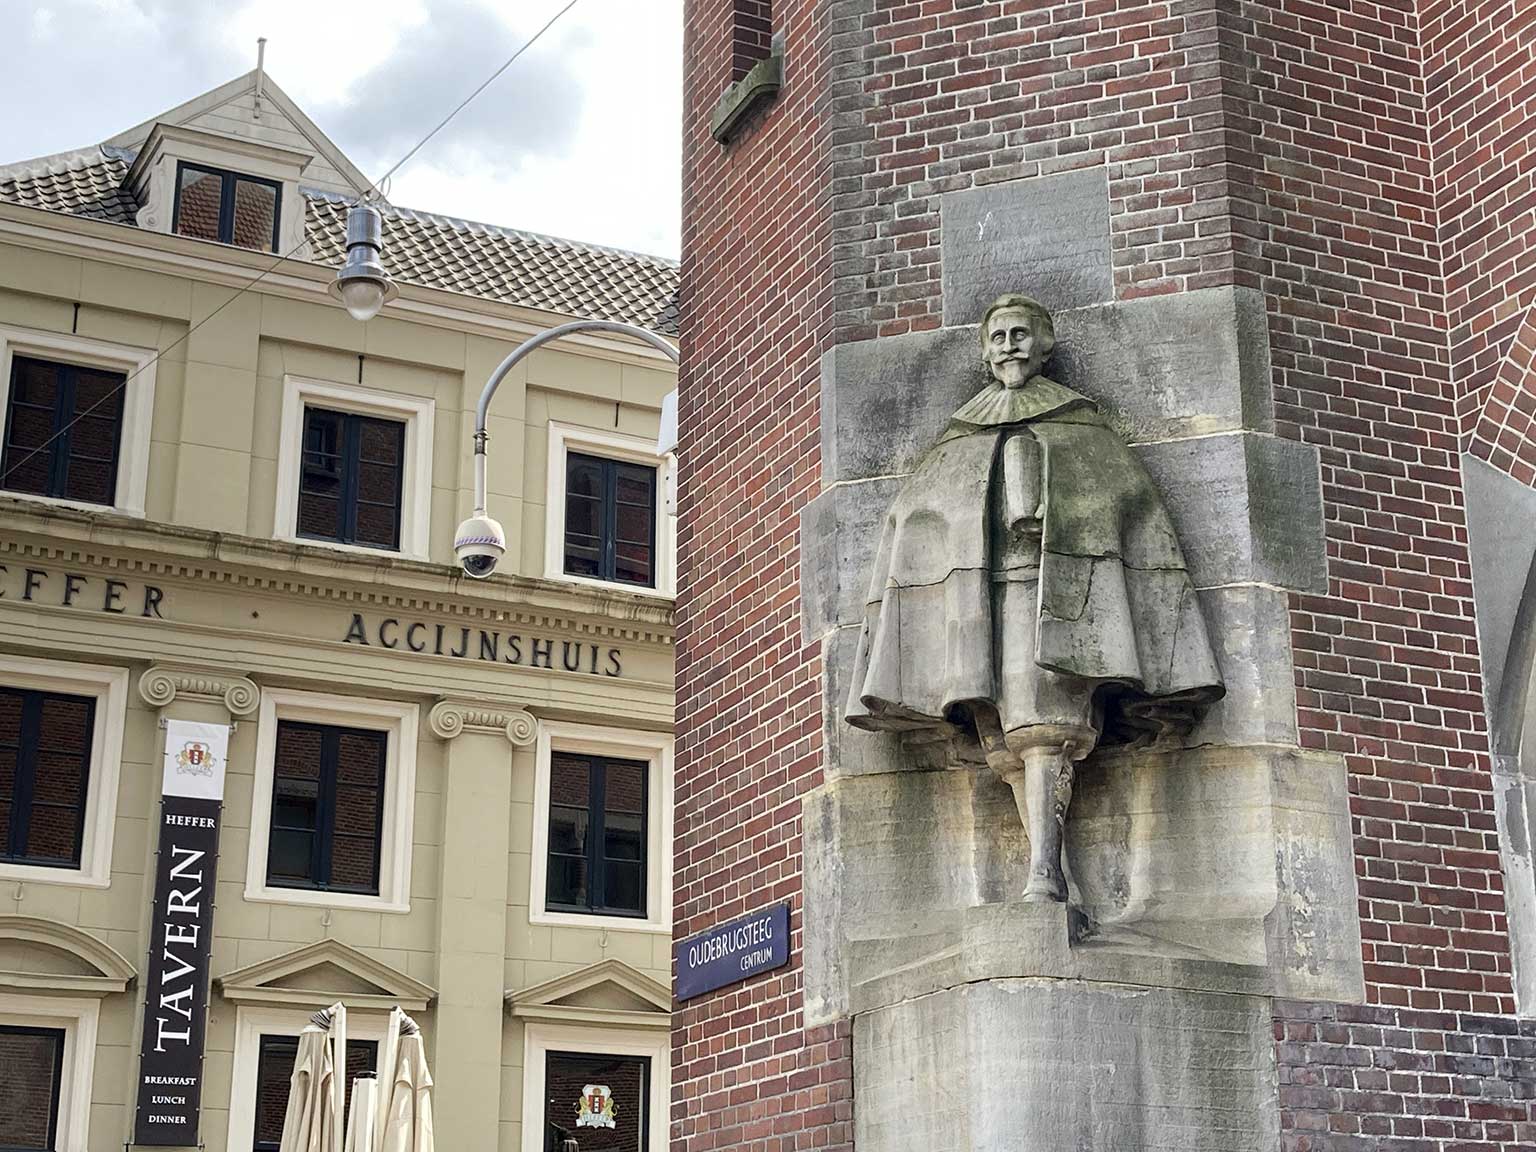 Partial view on the Accijnshuis with a corner of Berlage's Exchange, Amsterdam